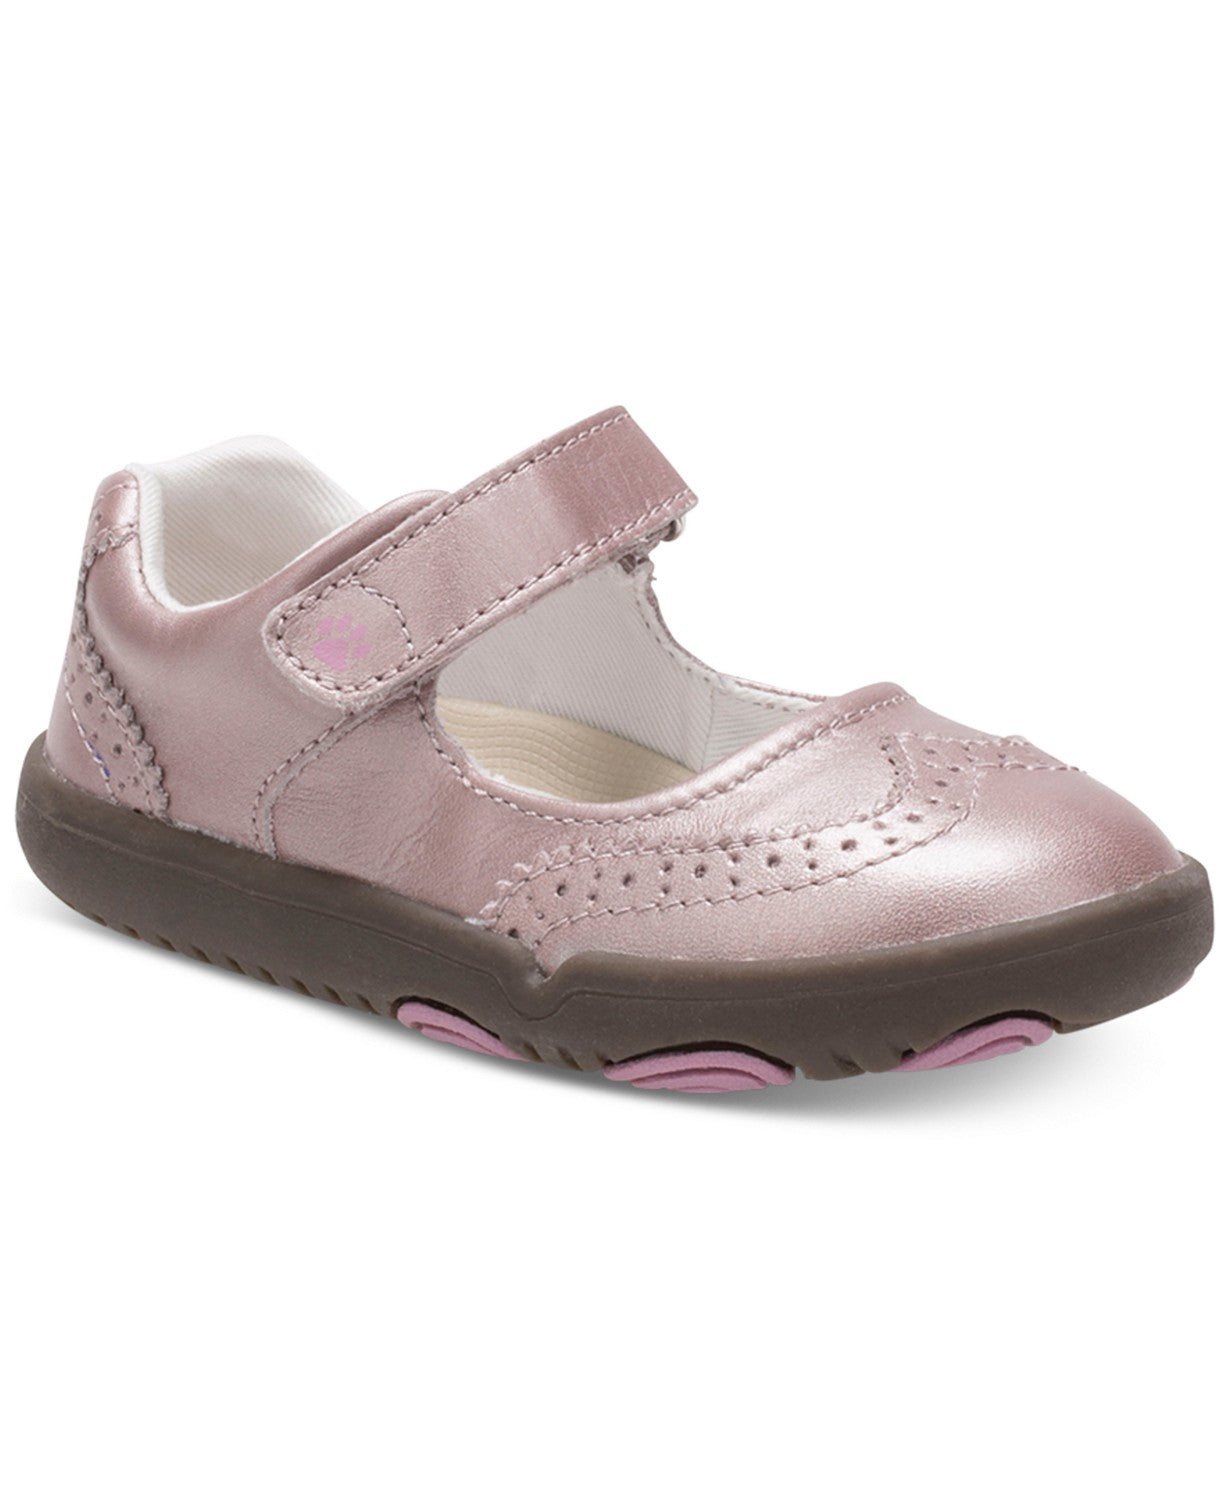 Kids Bella Mary Jane Rose Gold Feet Childrens Shoes